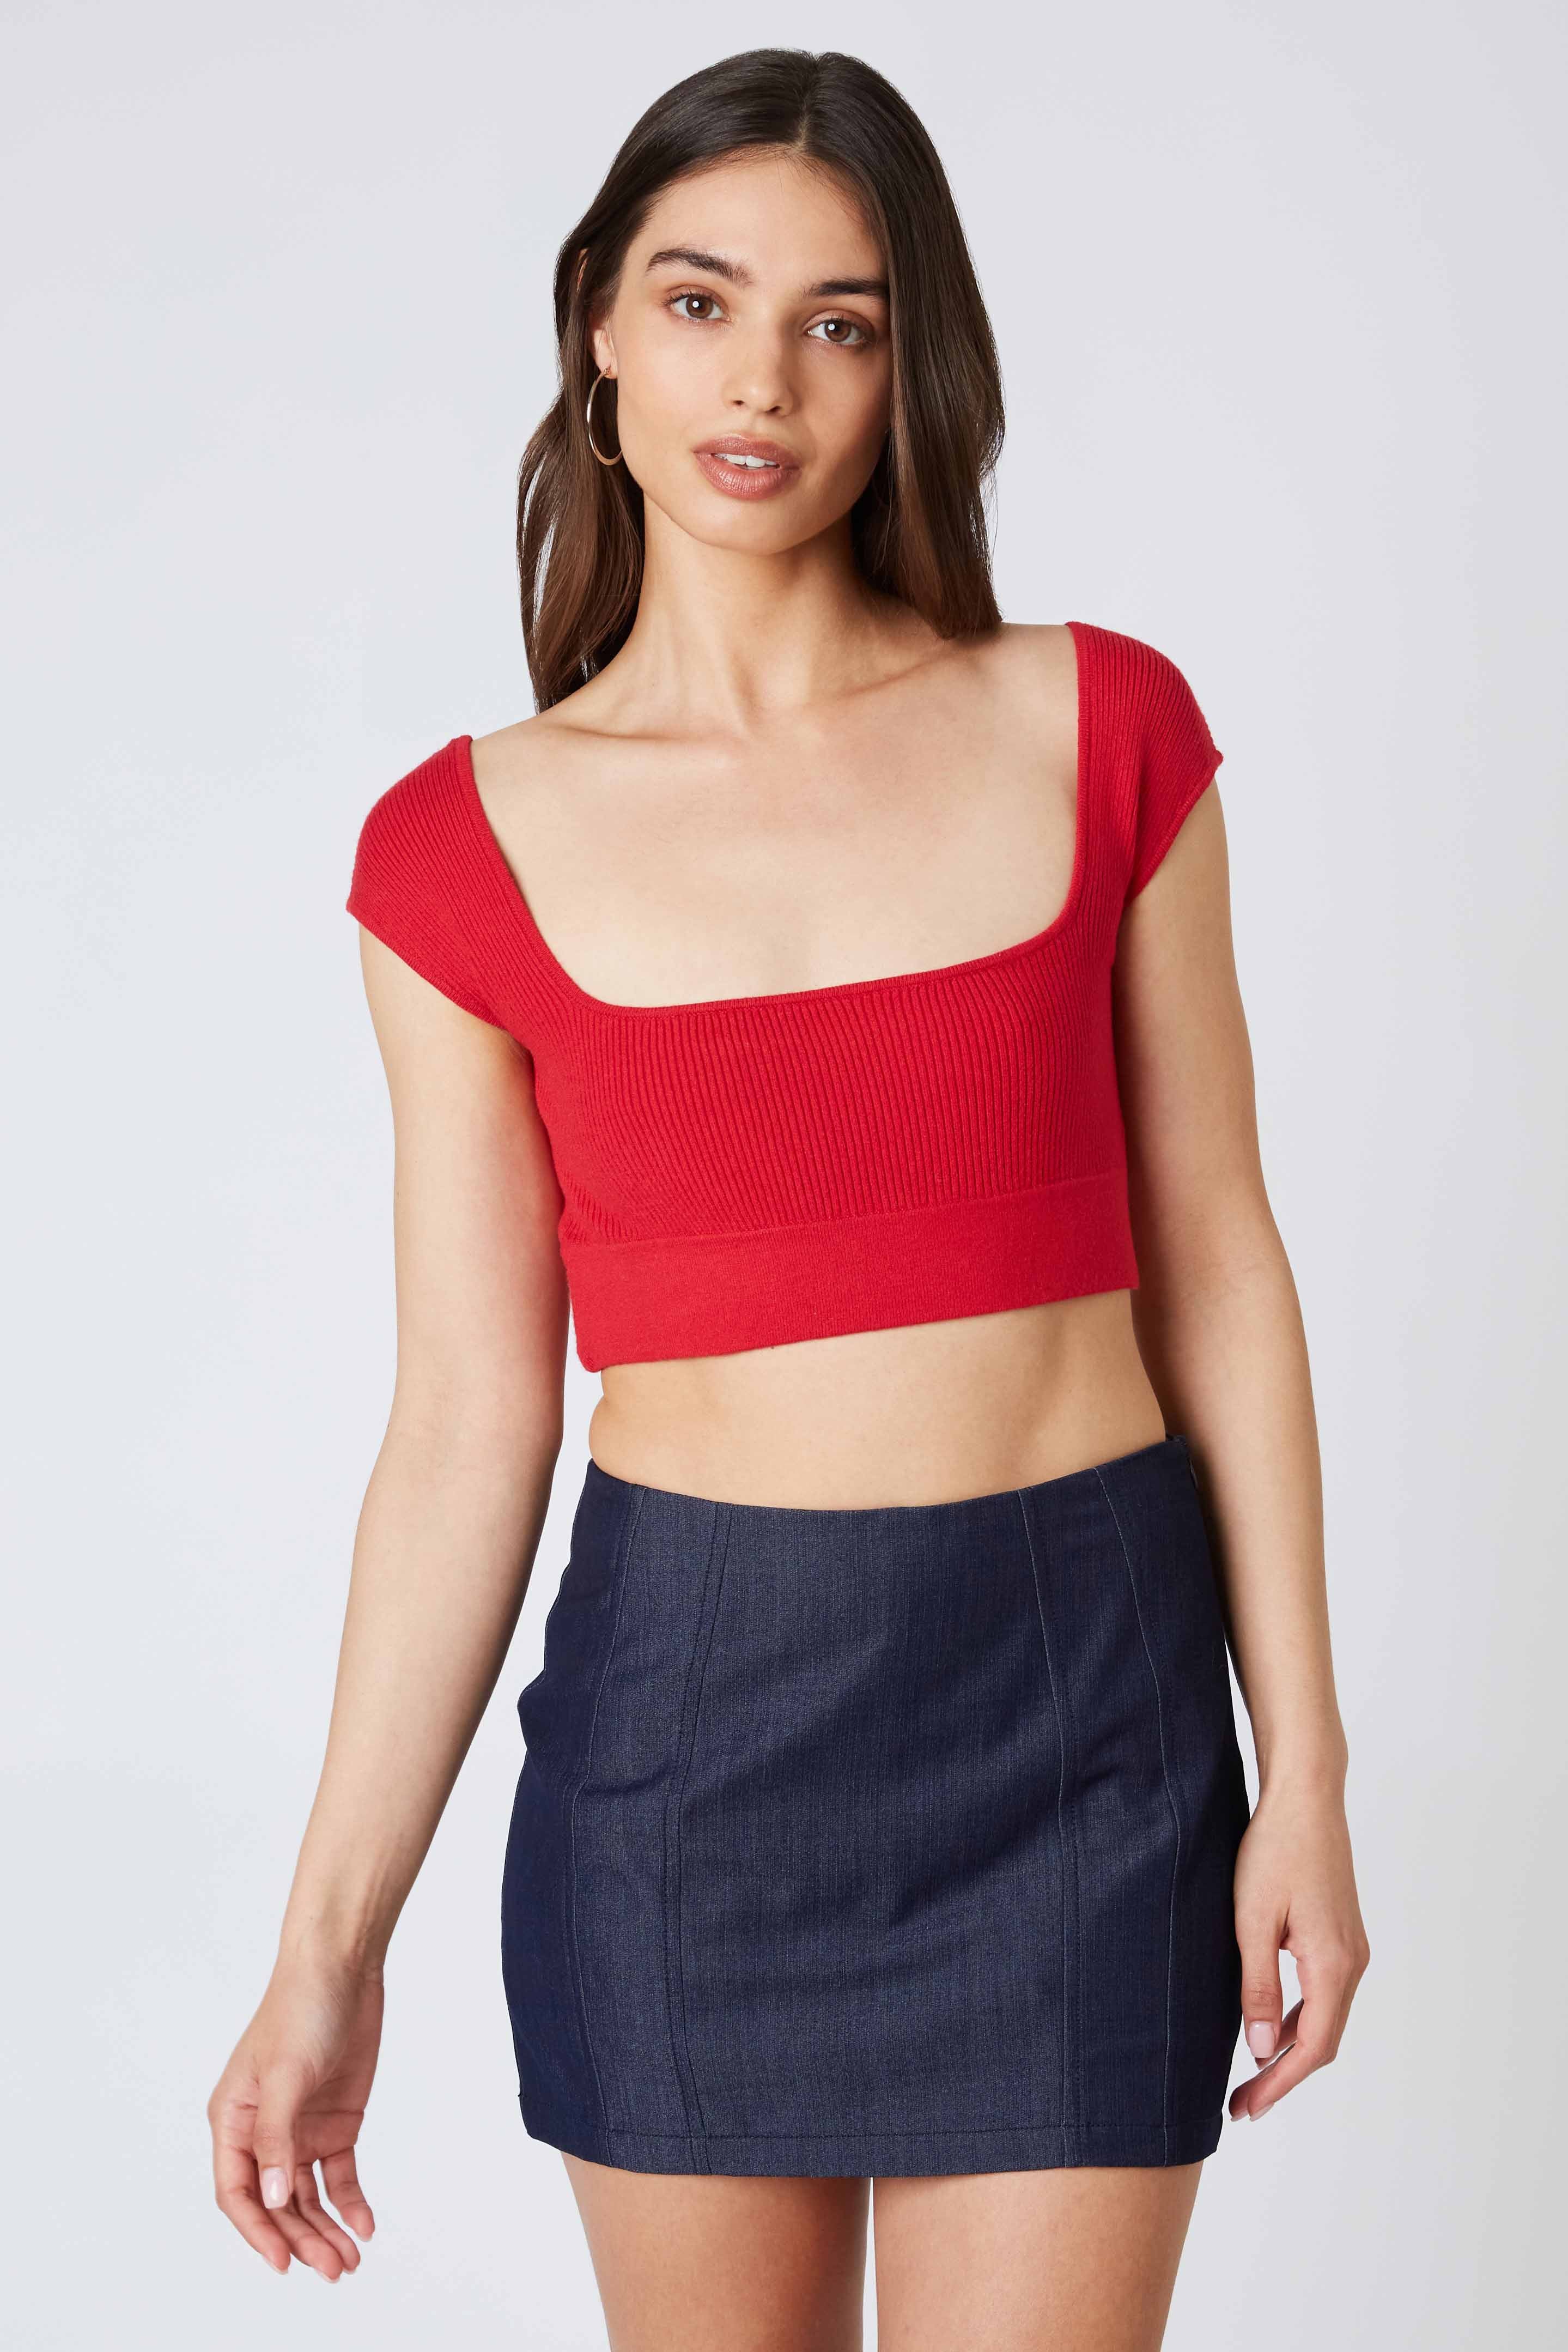 Square Neck Crop Top in Red Front View